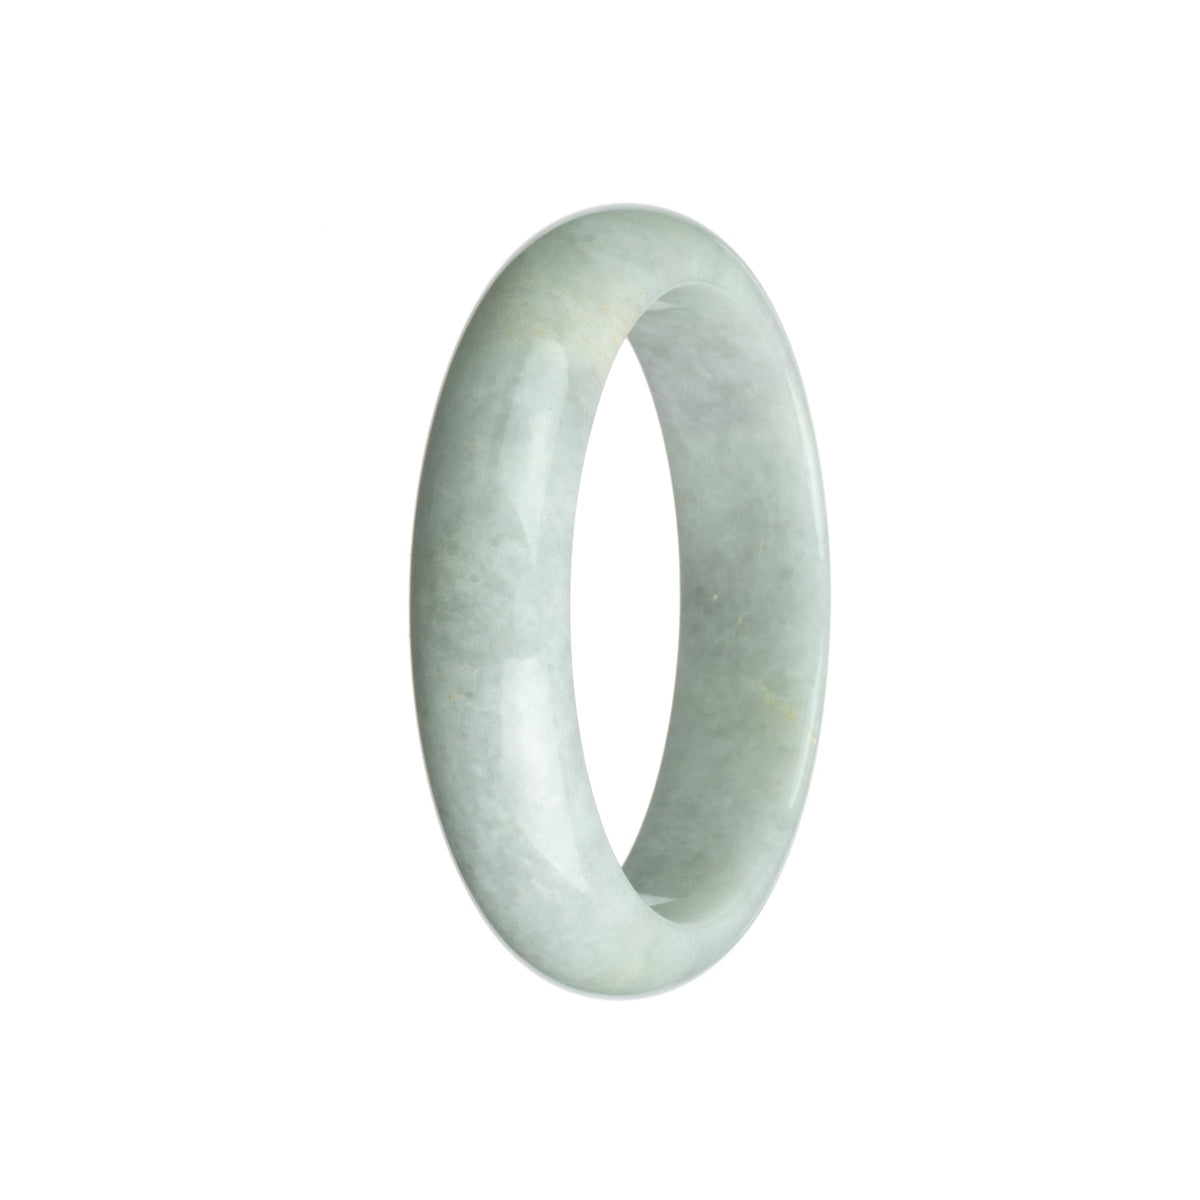 A close-up image of a stunning white Burma jade bracelet with a half-moon shape, measuring 58mm. This genuine, untreated jade piece is a beautiful addition to any jewelry collection.